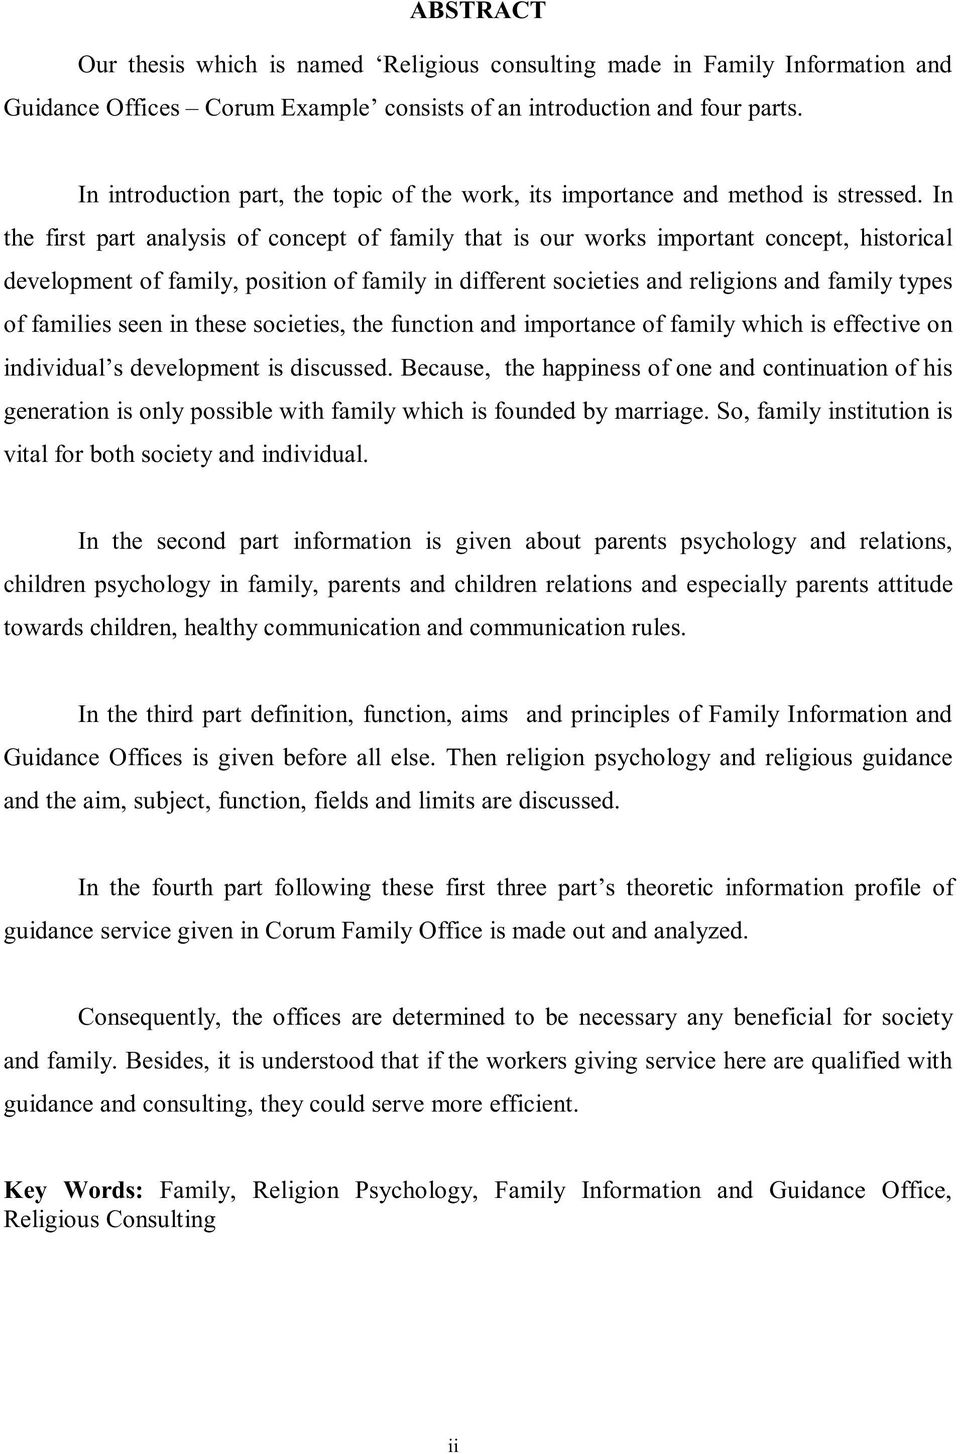 In the first part analysis of concept of family that is our works important concept, historical development of family, position of family in different societies and religions and family types of